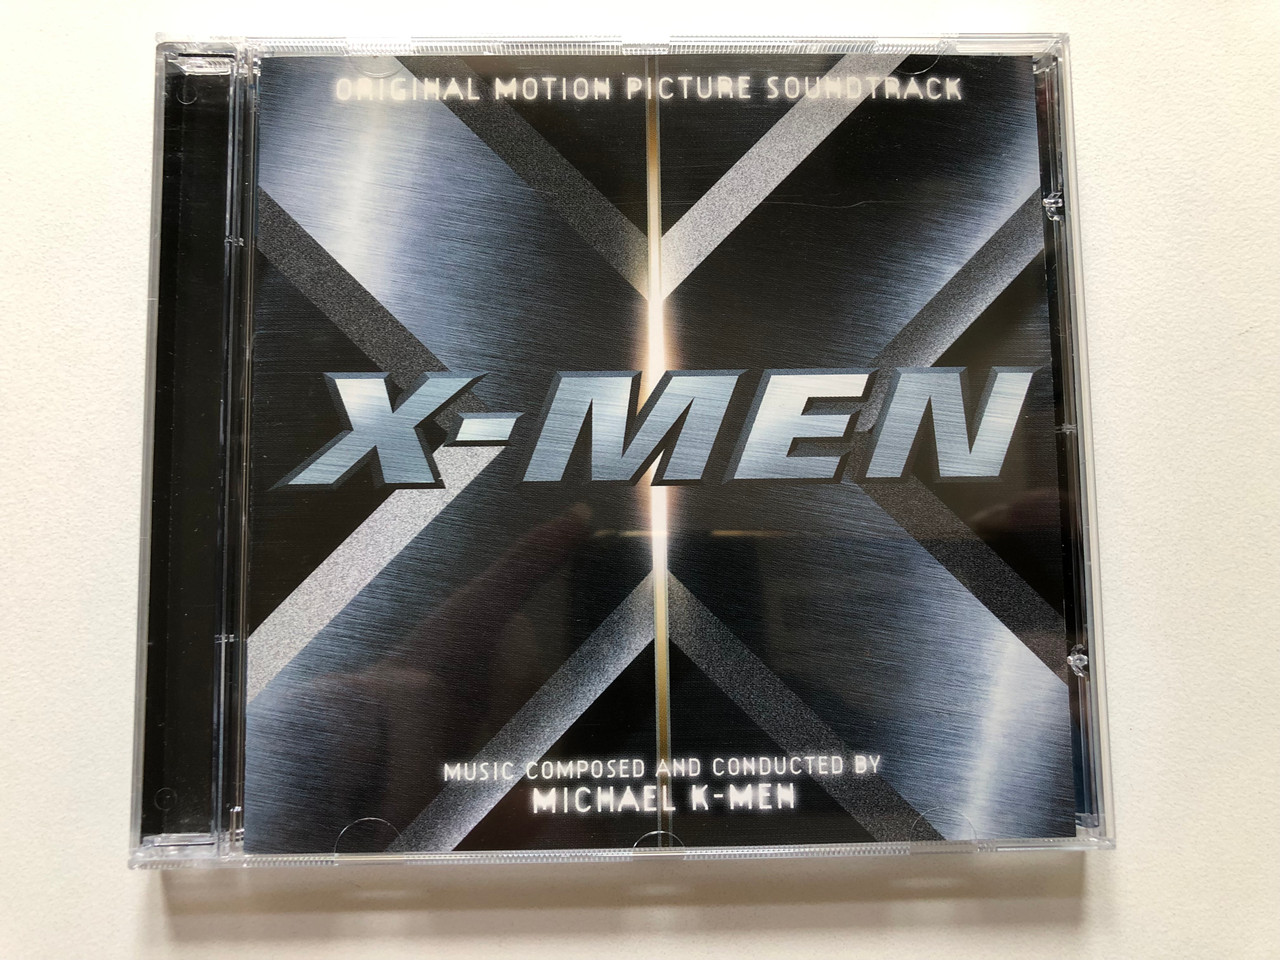 https://cdn10.bigcommerce.com/s-62bdpkt7pb/products/0/images/313266/X-Men_Original_Motion_Picture_Soundtrack_-_Music_Composed_And_Conducted_By_Michael_K-Men_Decca_Audio_CD_2000_467_270-2_1__25430.1700646759.1280.1280.JPG?c=2